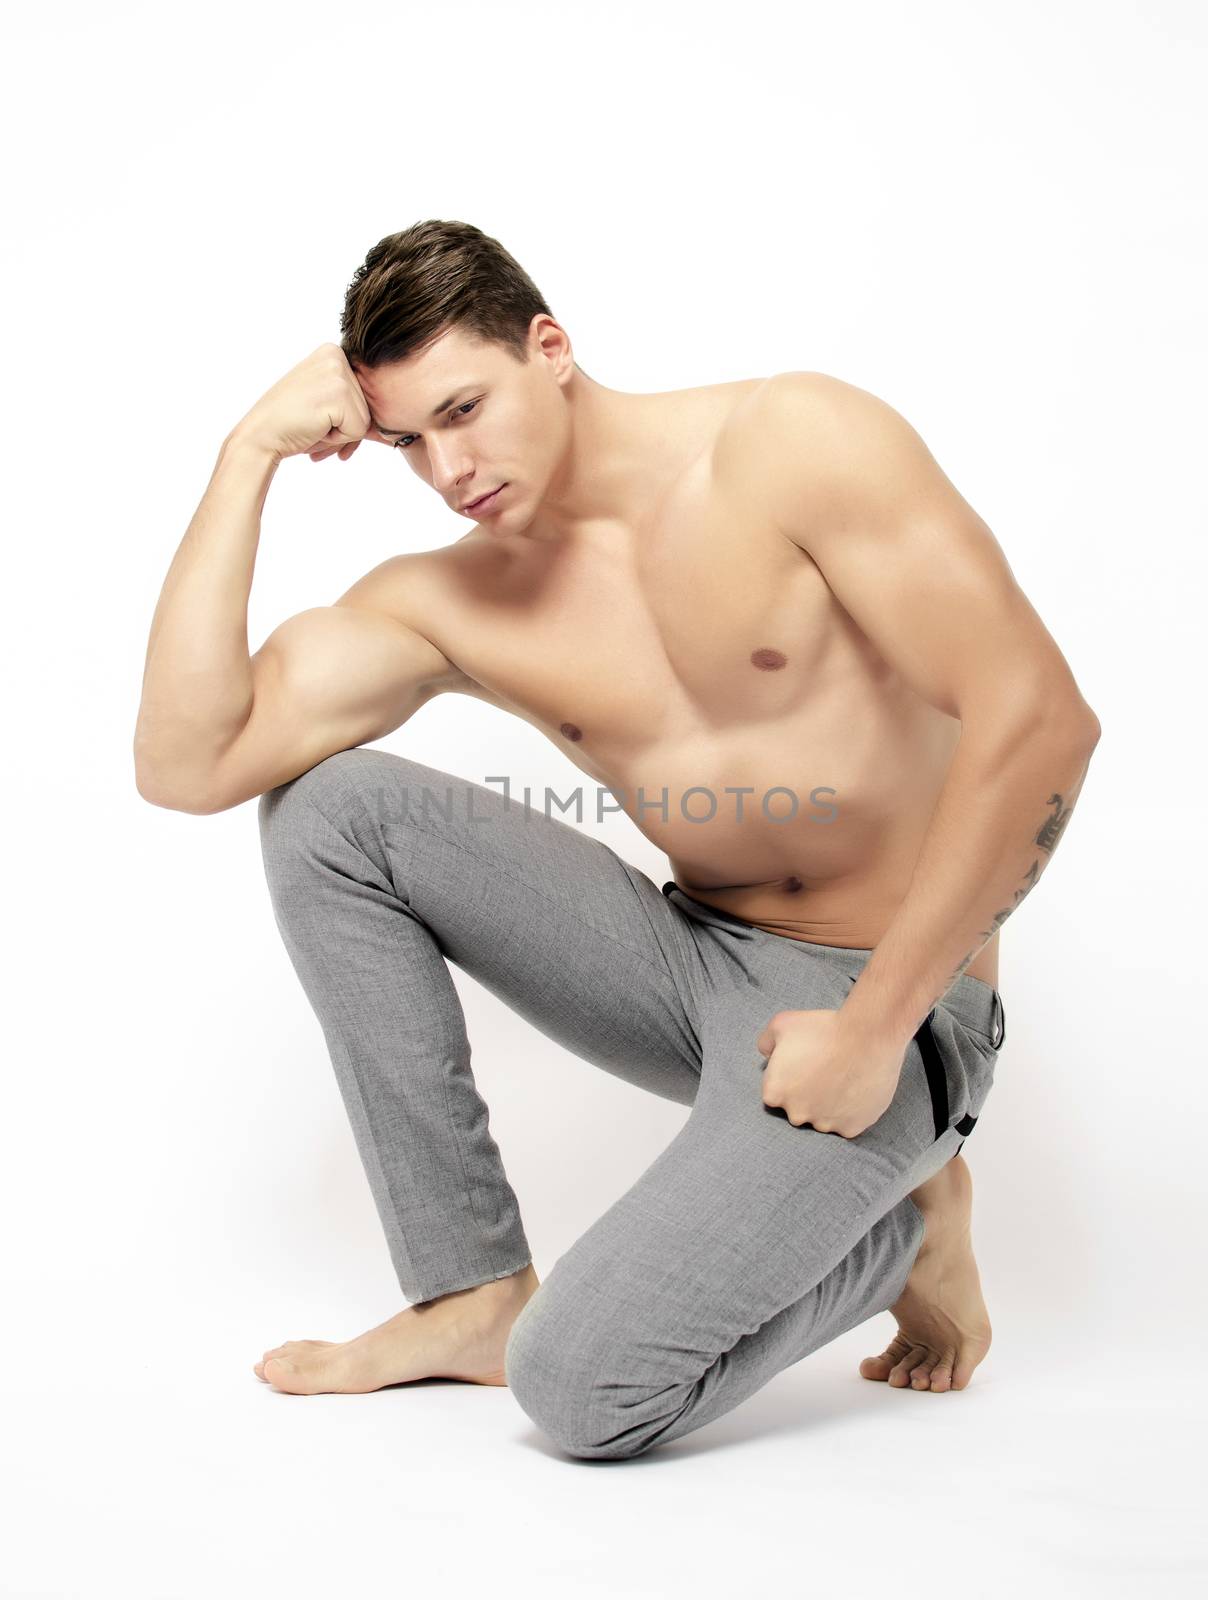 Beautiful muscular young man posing on white background